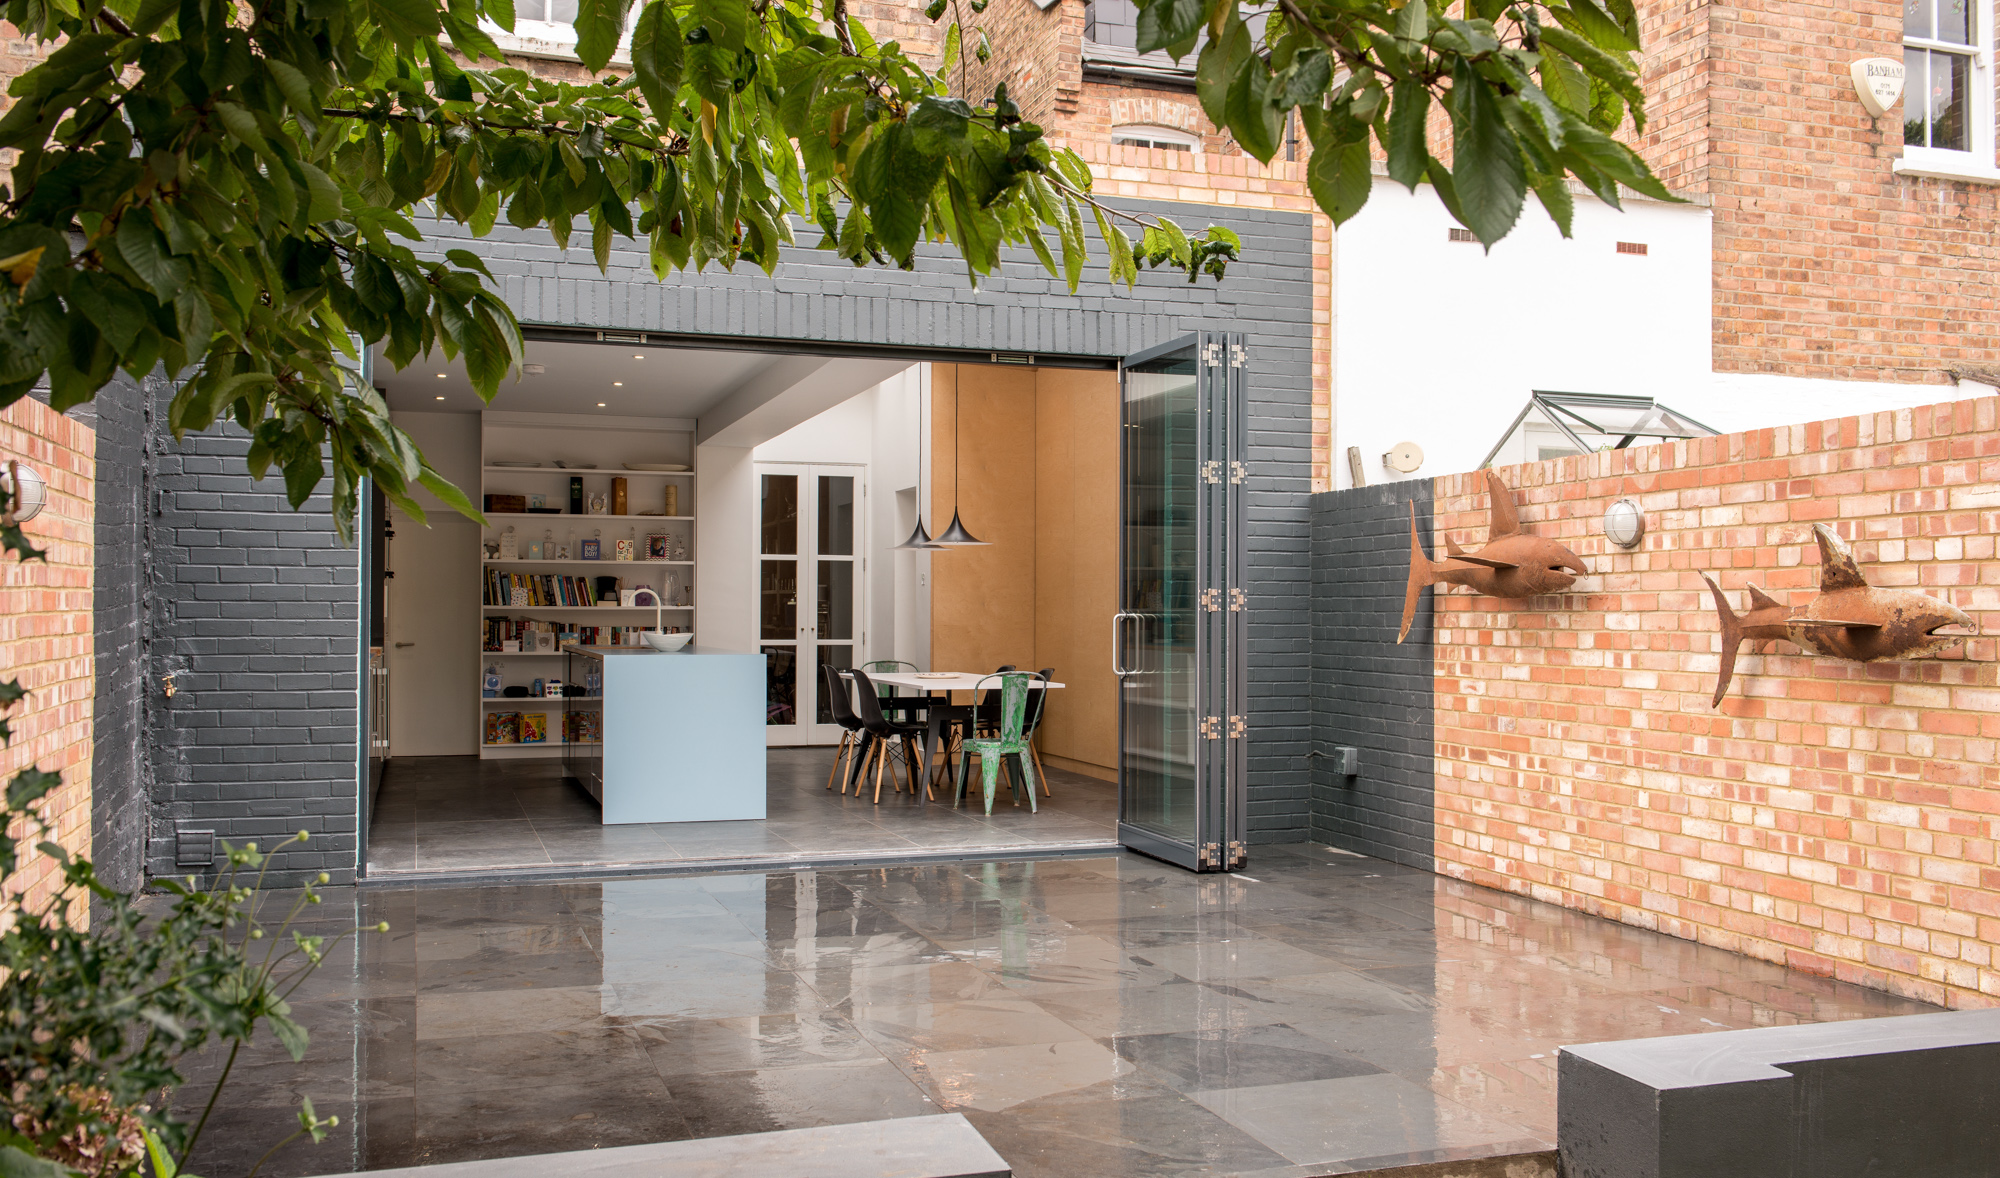  Private House in London, Kitchen extension by Buchanan Partnership Architects. Photographs by Richard Stonehouse. Architectural and interior photography of Victorian House Kitchen extension.&nbsp; 